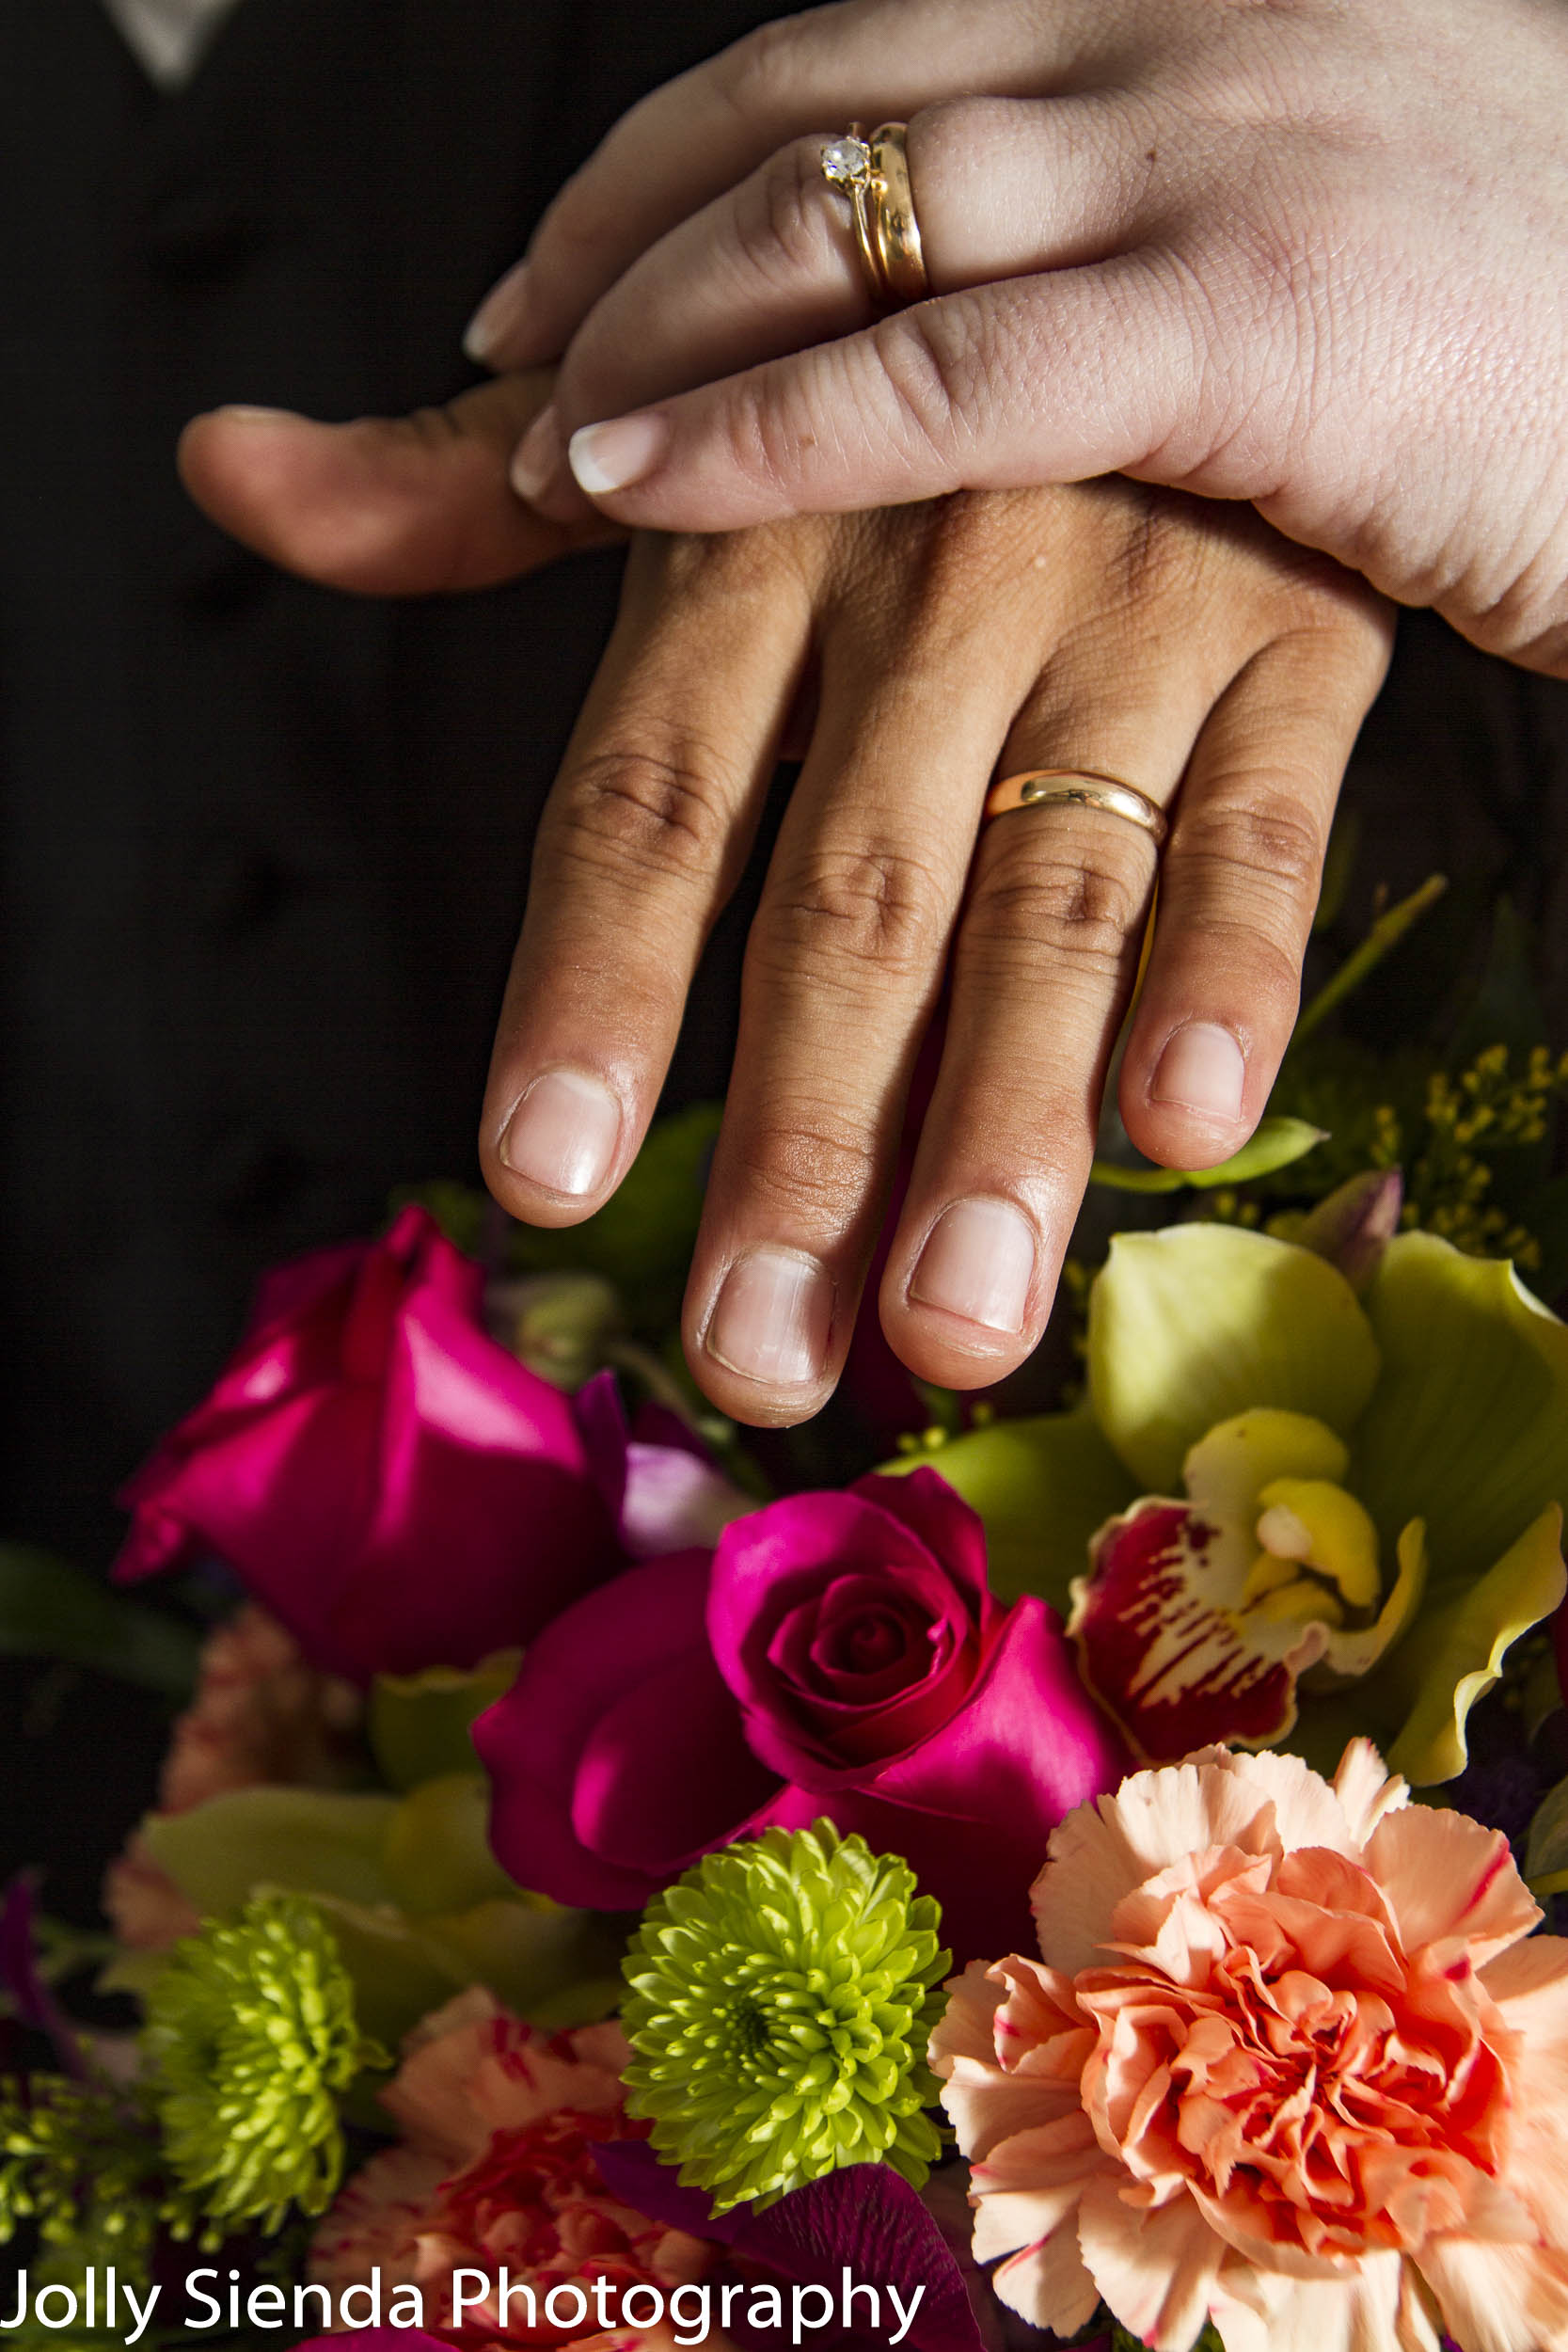 Portrait of the wedding rings and the bouquet